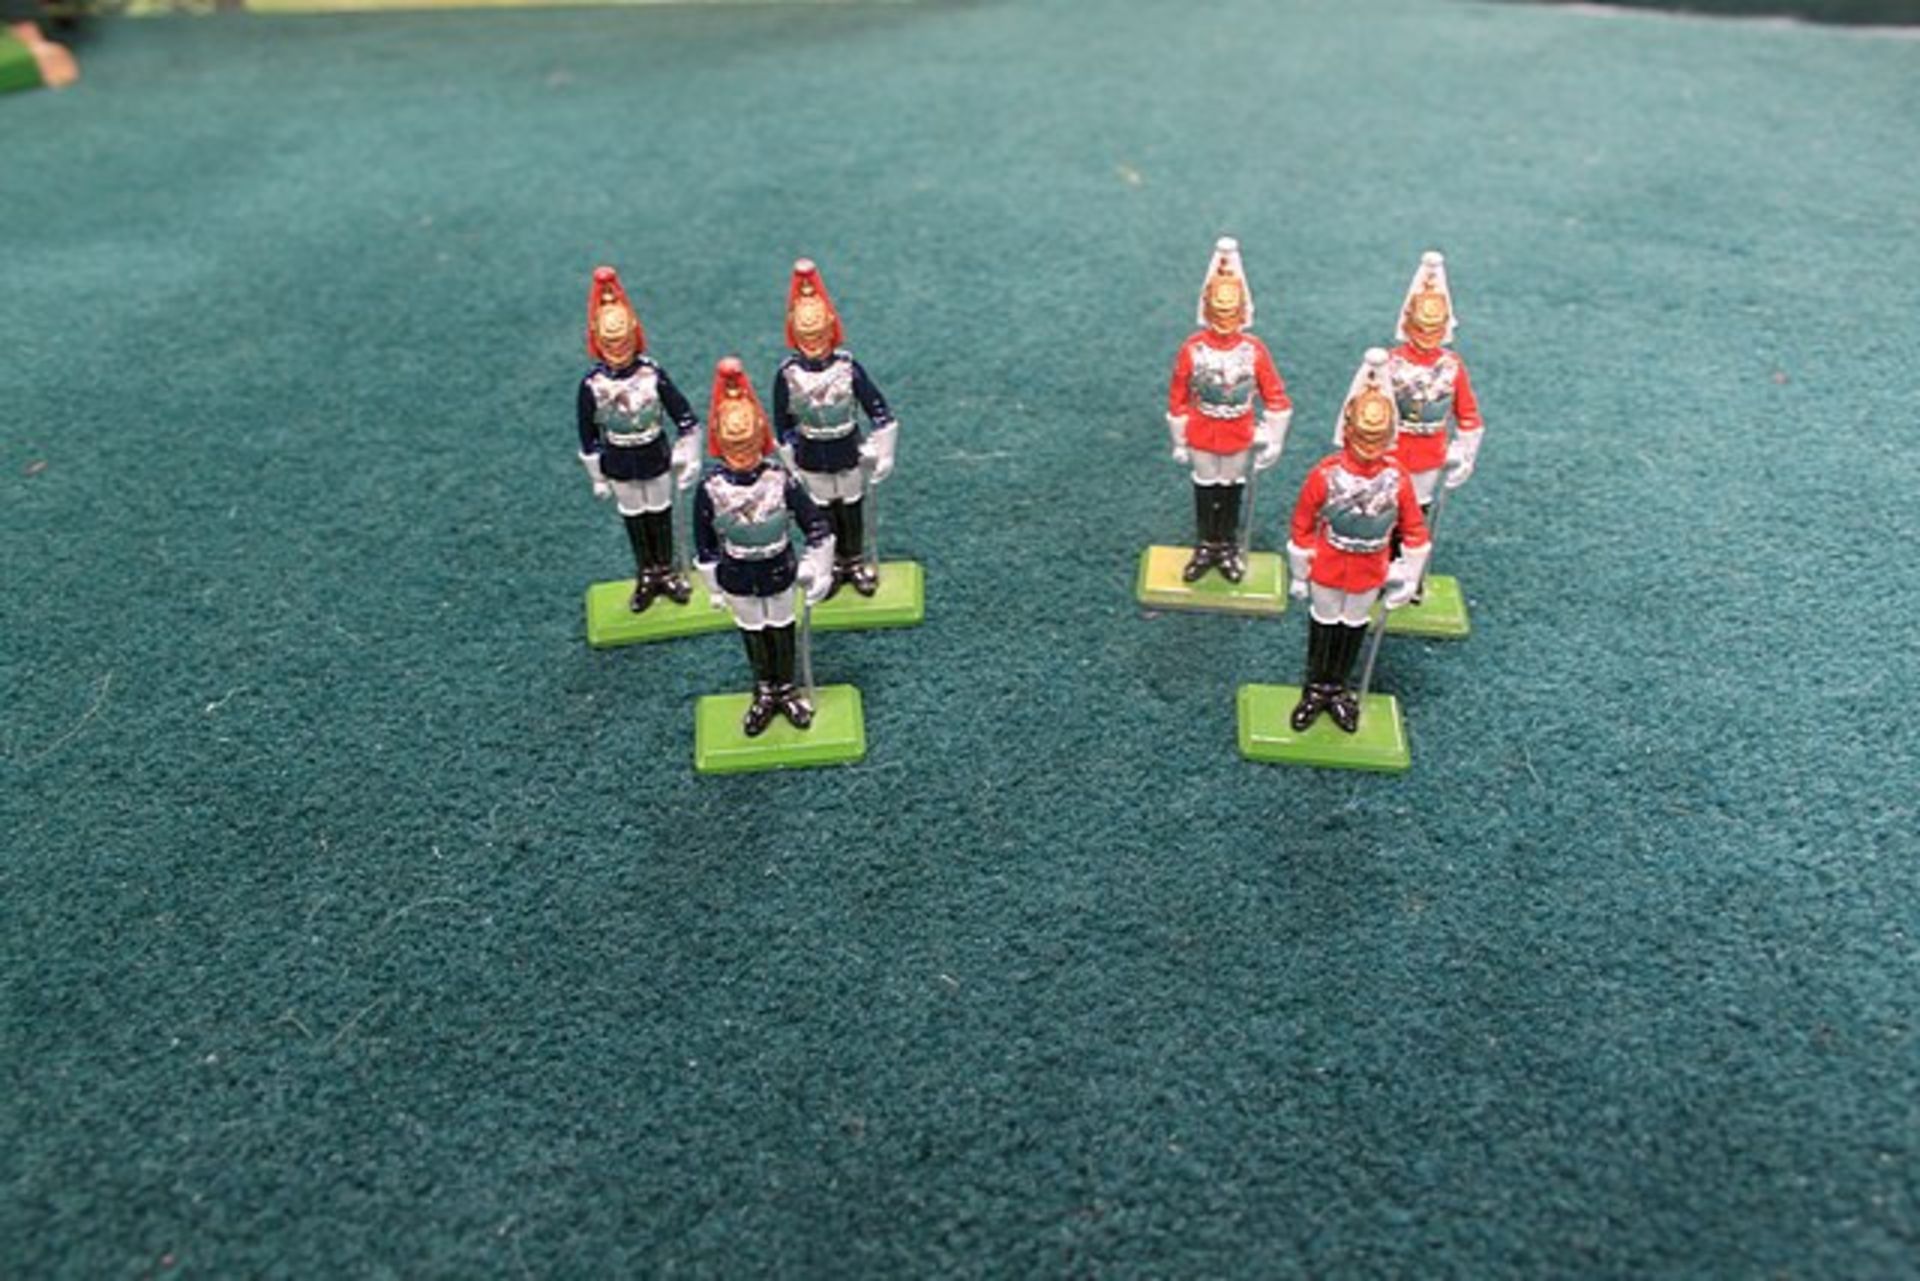 6 x Britains Toy Soldiers Comprising 3 x Britains Queens Guards In Red & 3 x Britains Queens